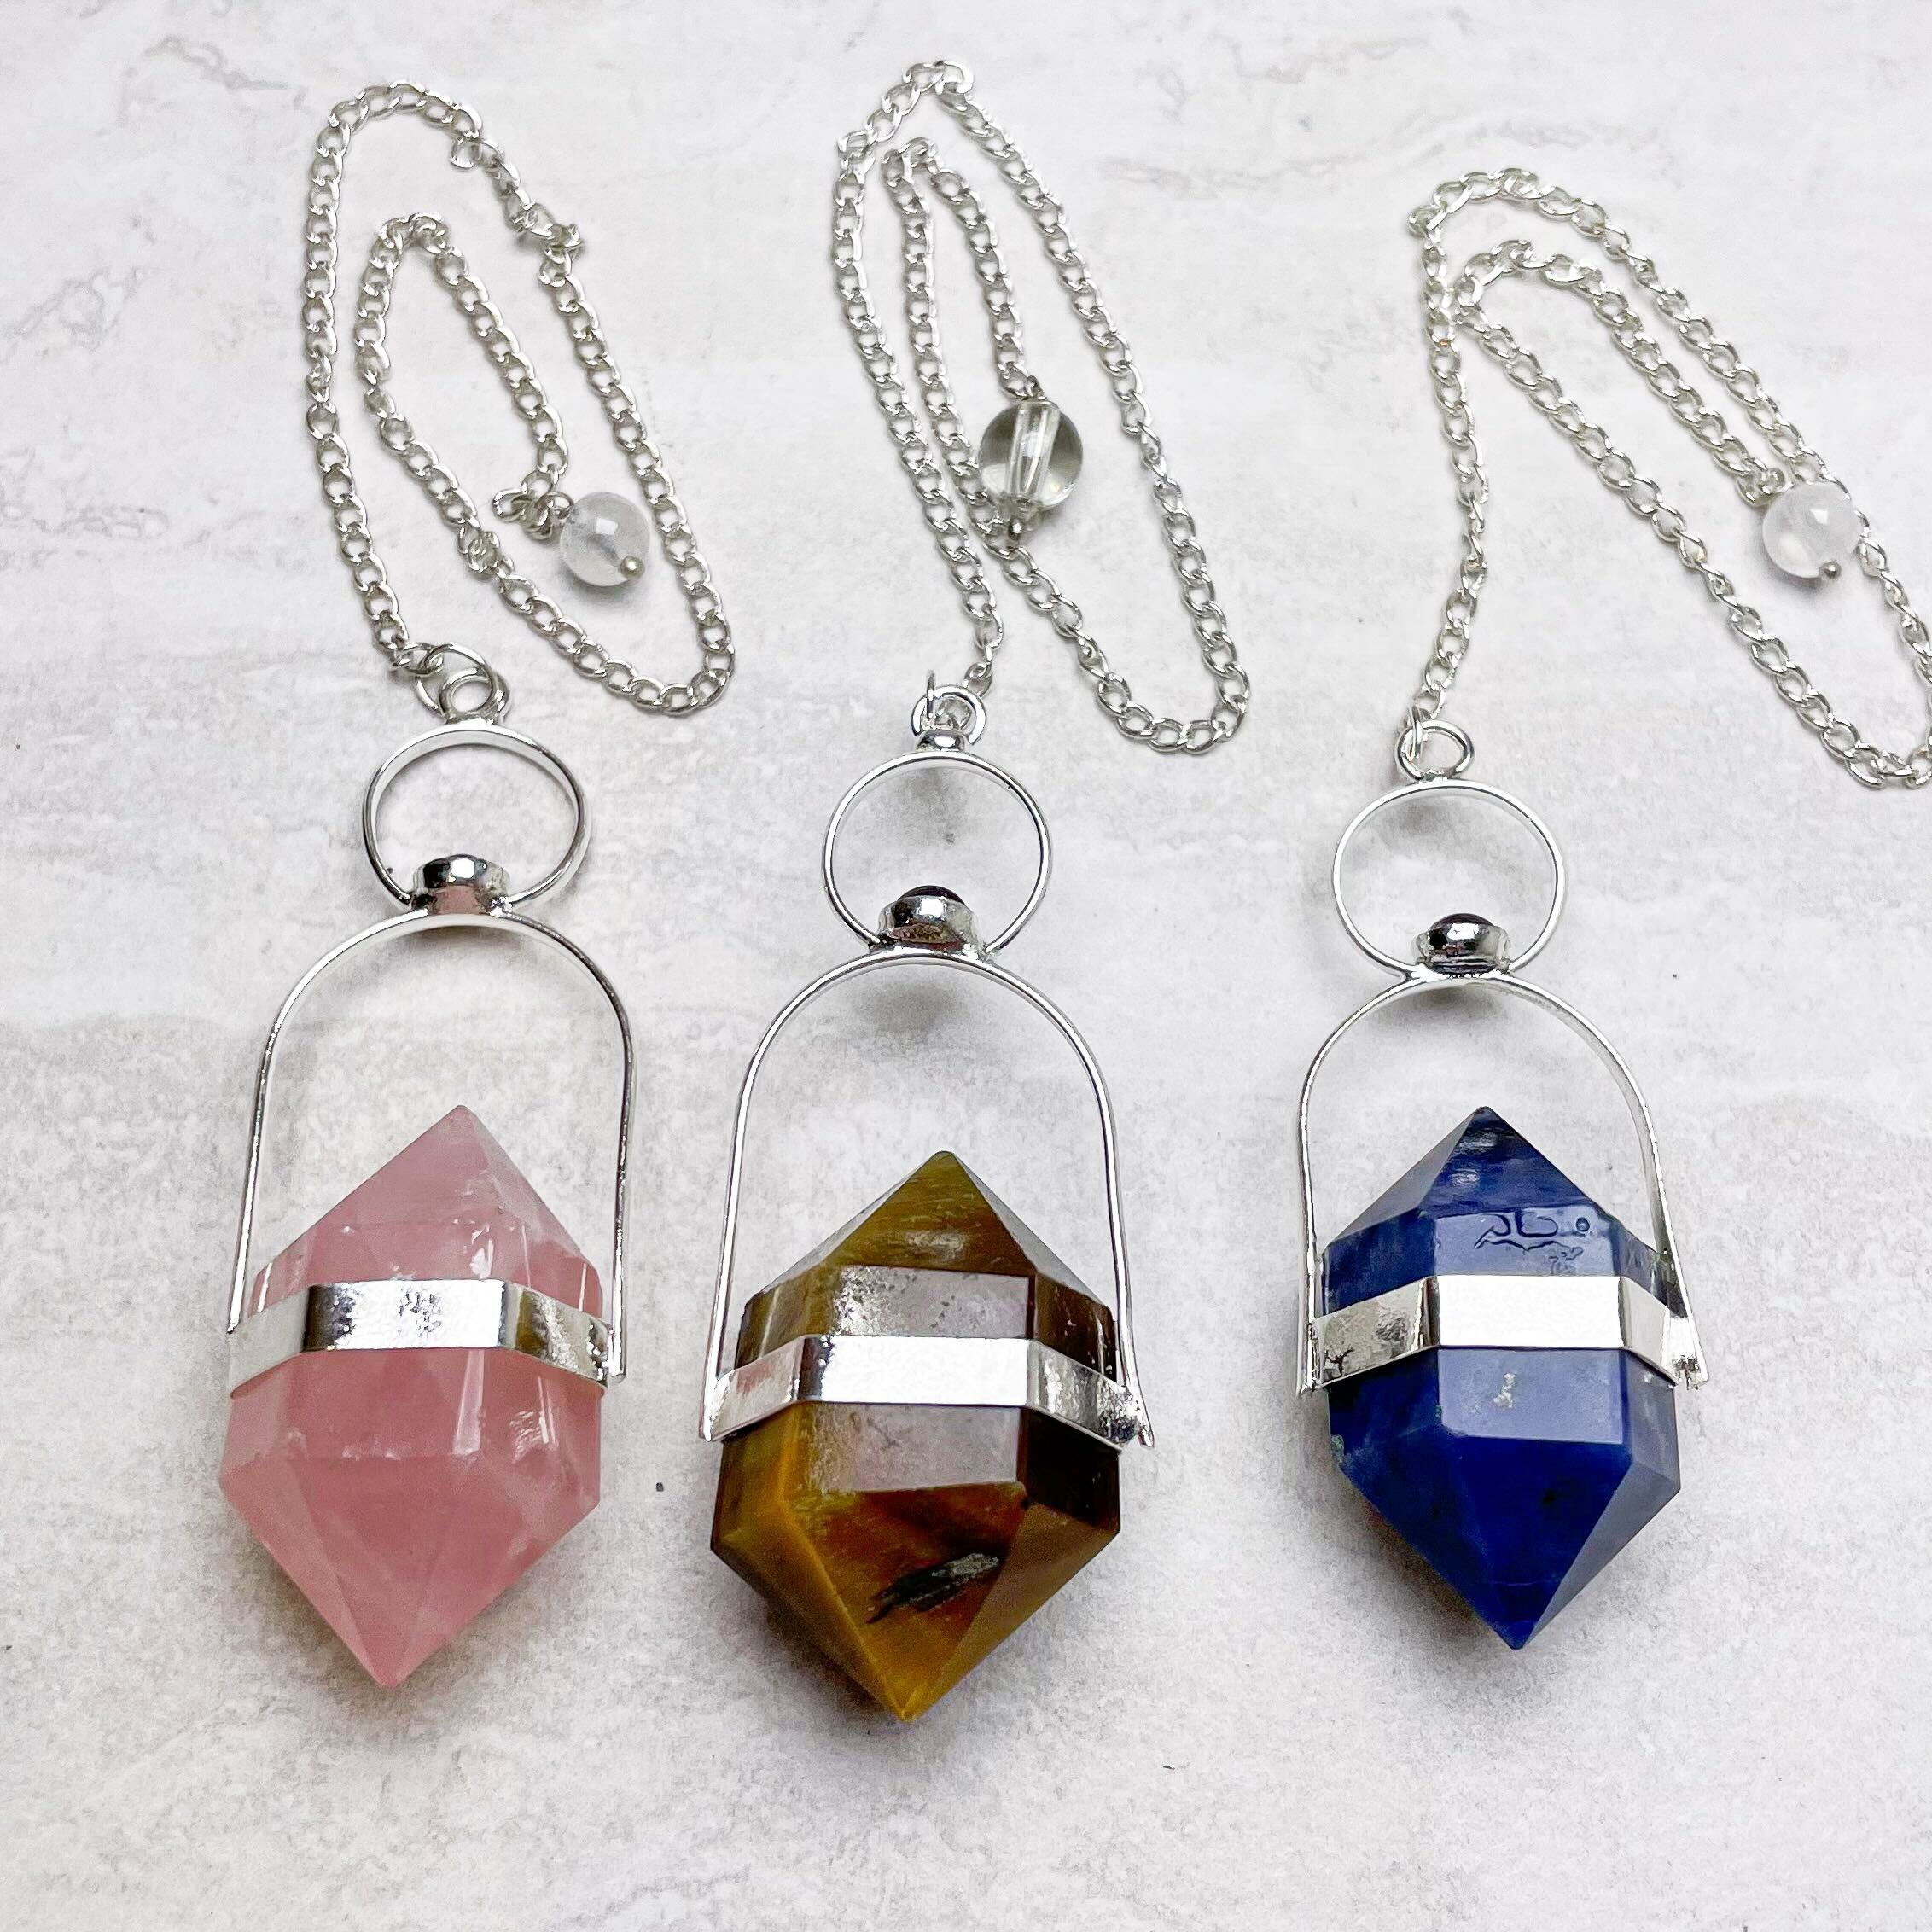 Double Terminated Crystal Pendulums